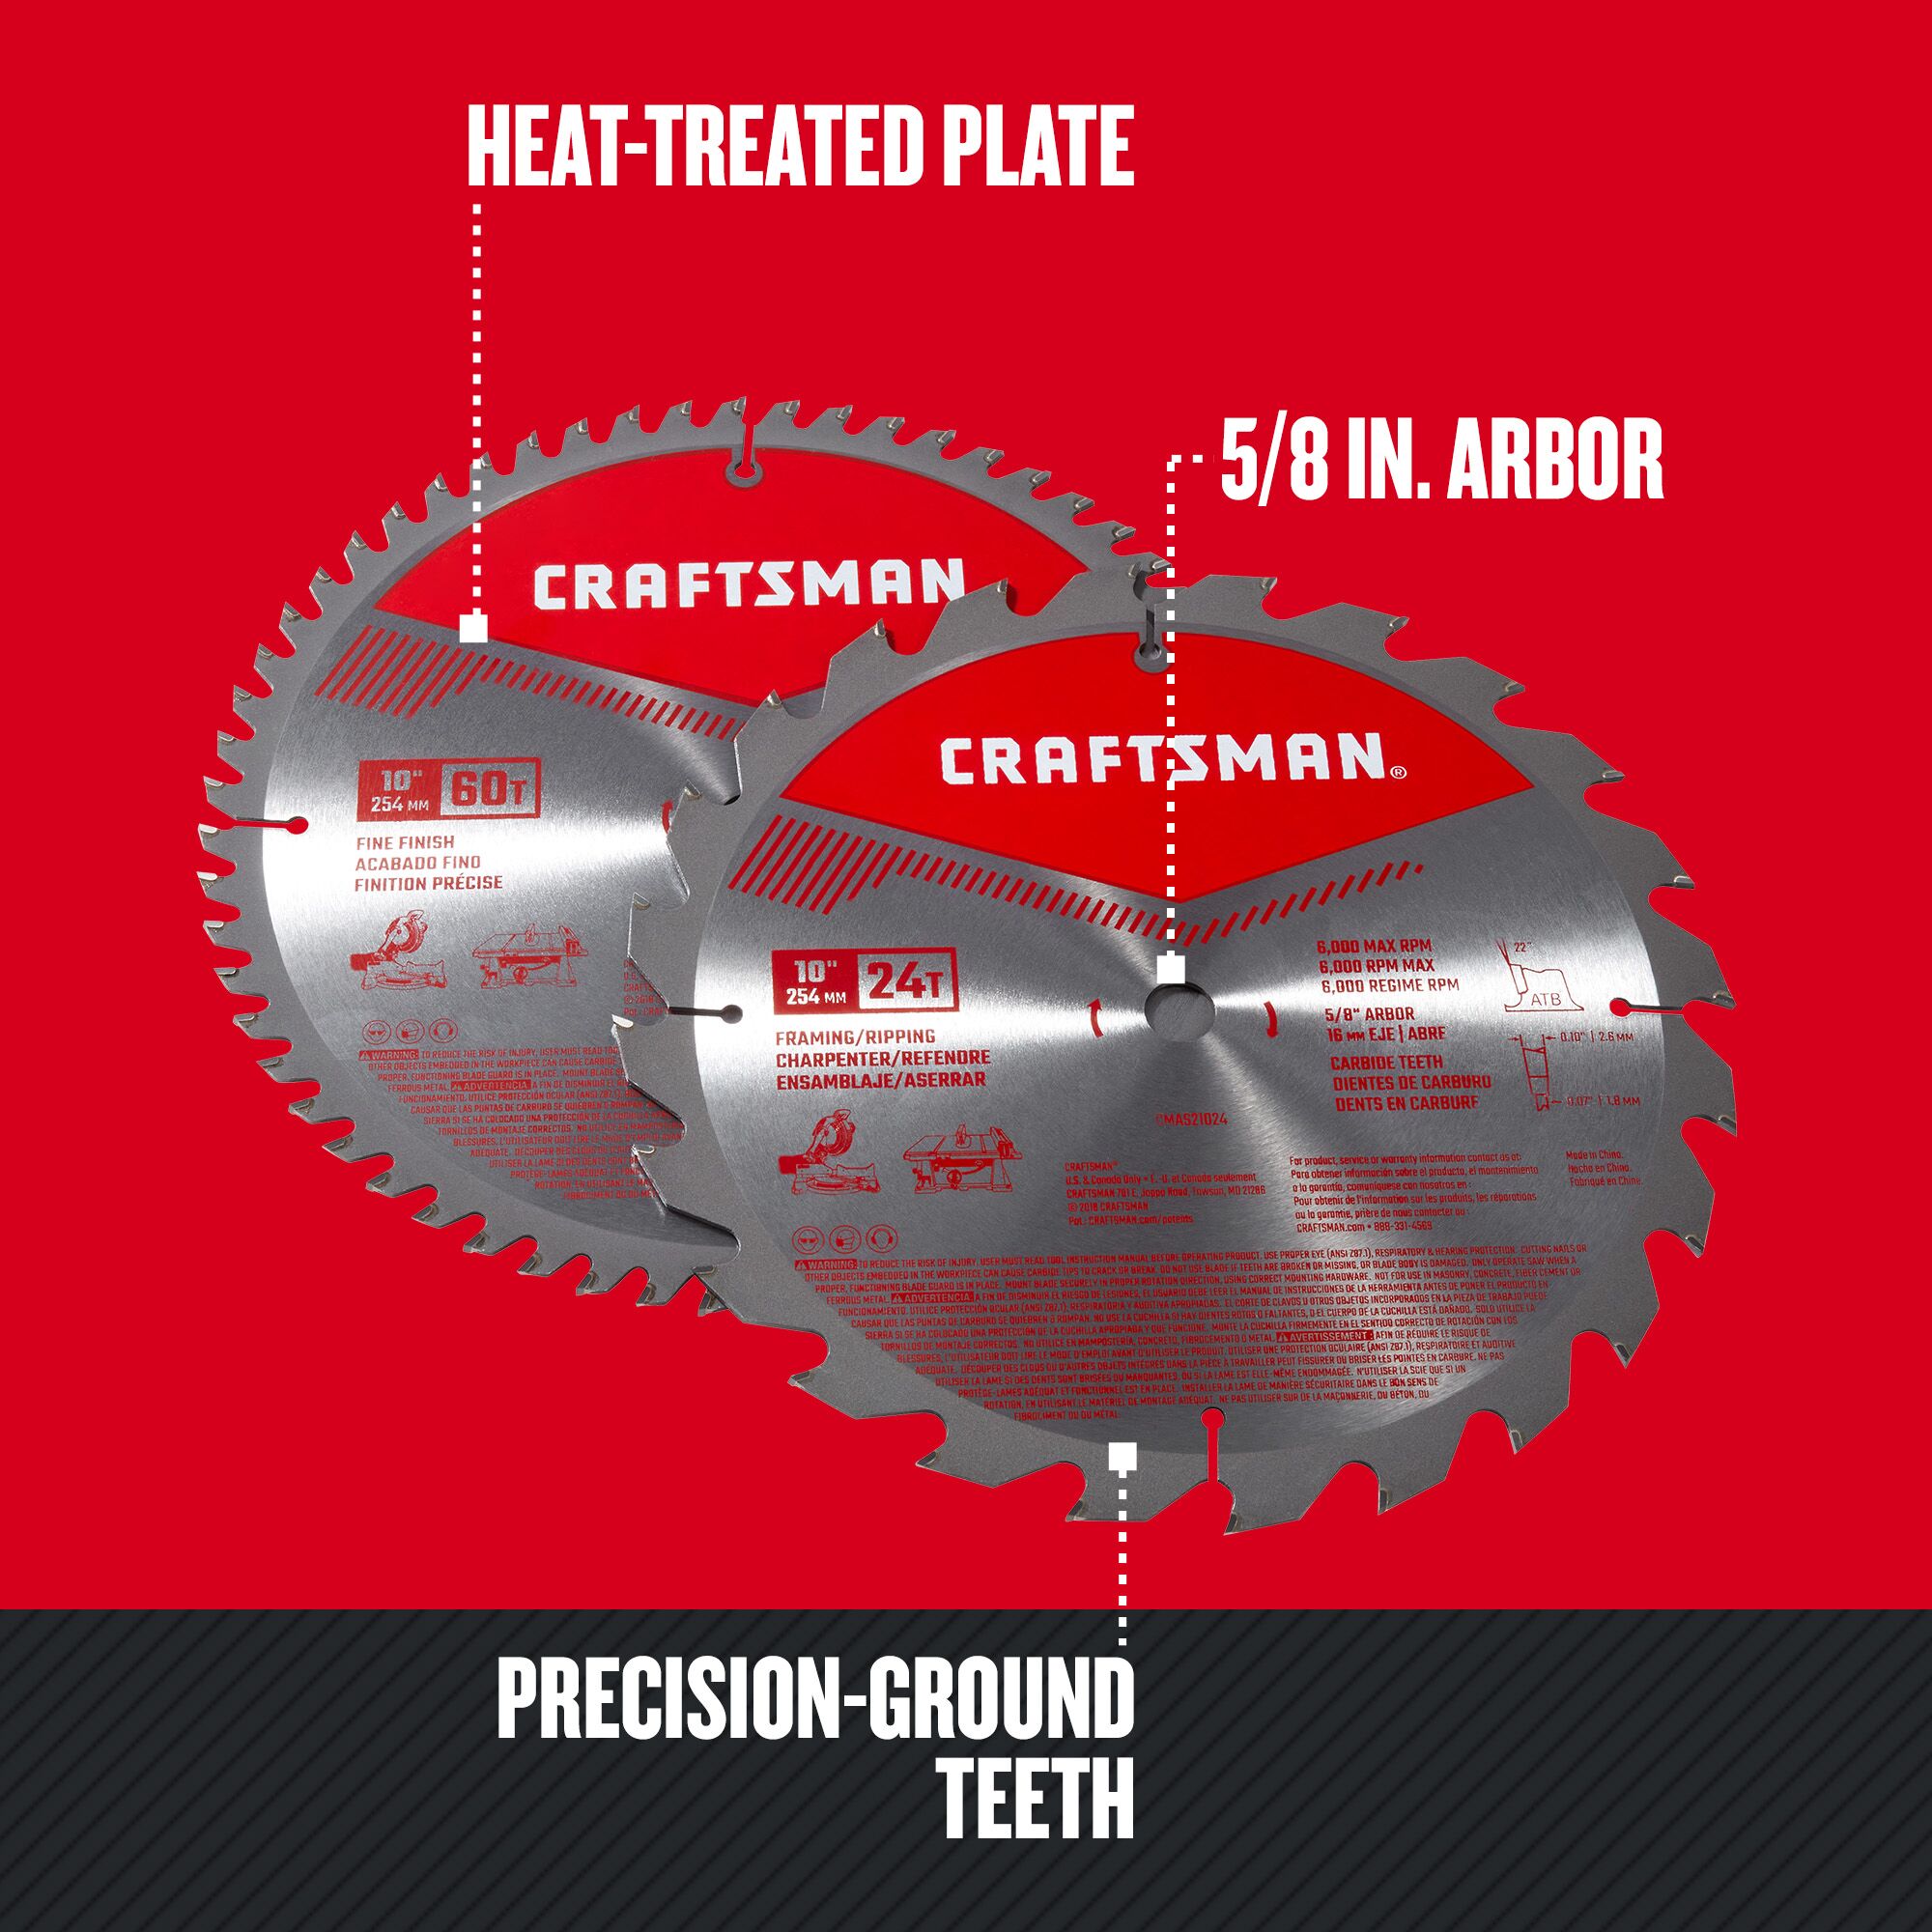 Graphic of CRAFTSMAN Blades: Table Saw highlighting product features